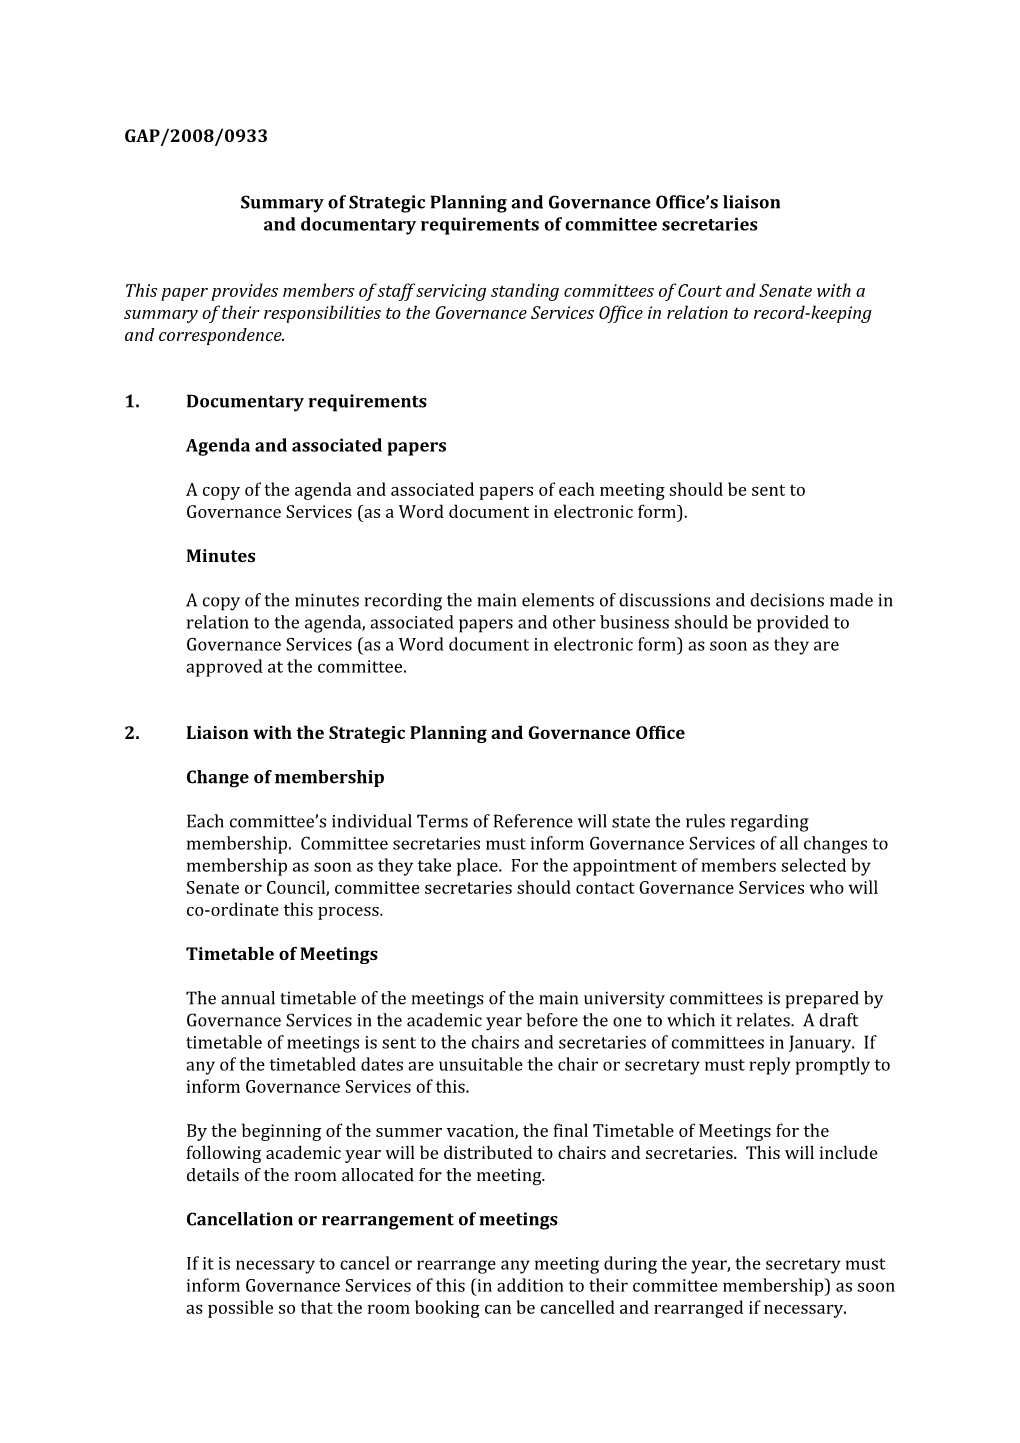 Actions Points from Meeting Between Claire Stevenson and David Lomas Re Records Management